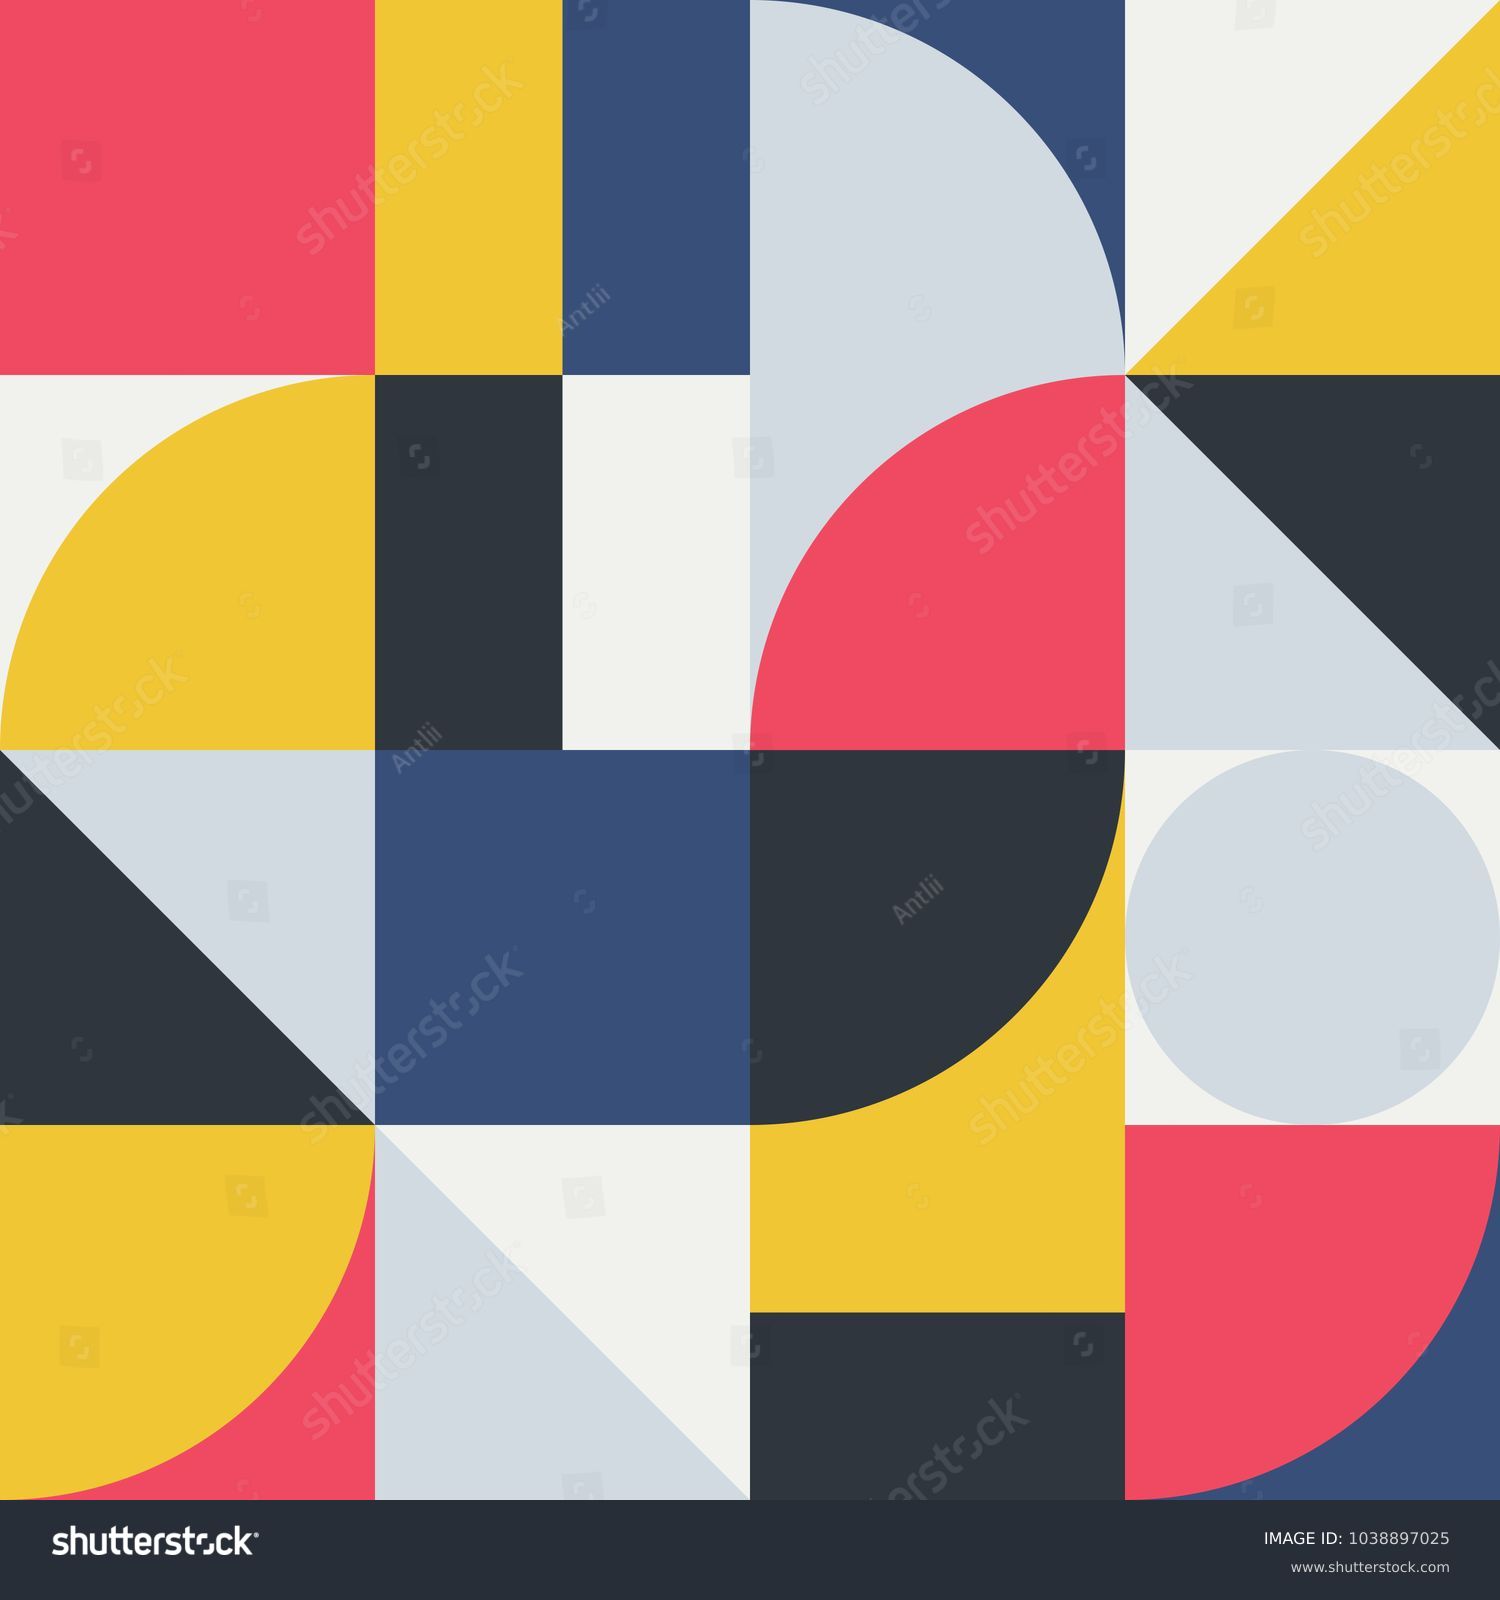 Geometry minimalistic artwork poster with simple shape and figure. Abstract vector pattern design in Scandinavian style for web banner, business presentation, branding package, fabric print, wallpaper #1038897025